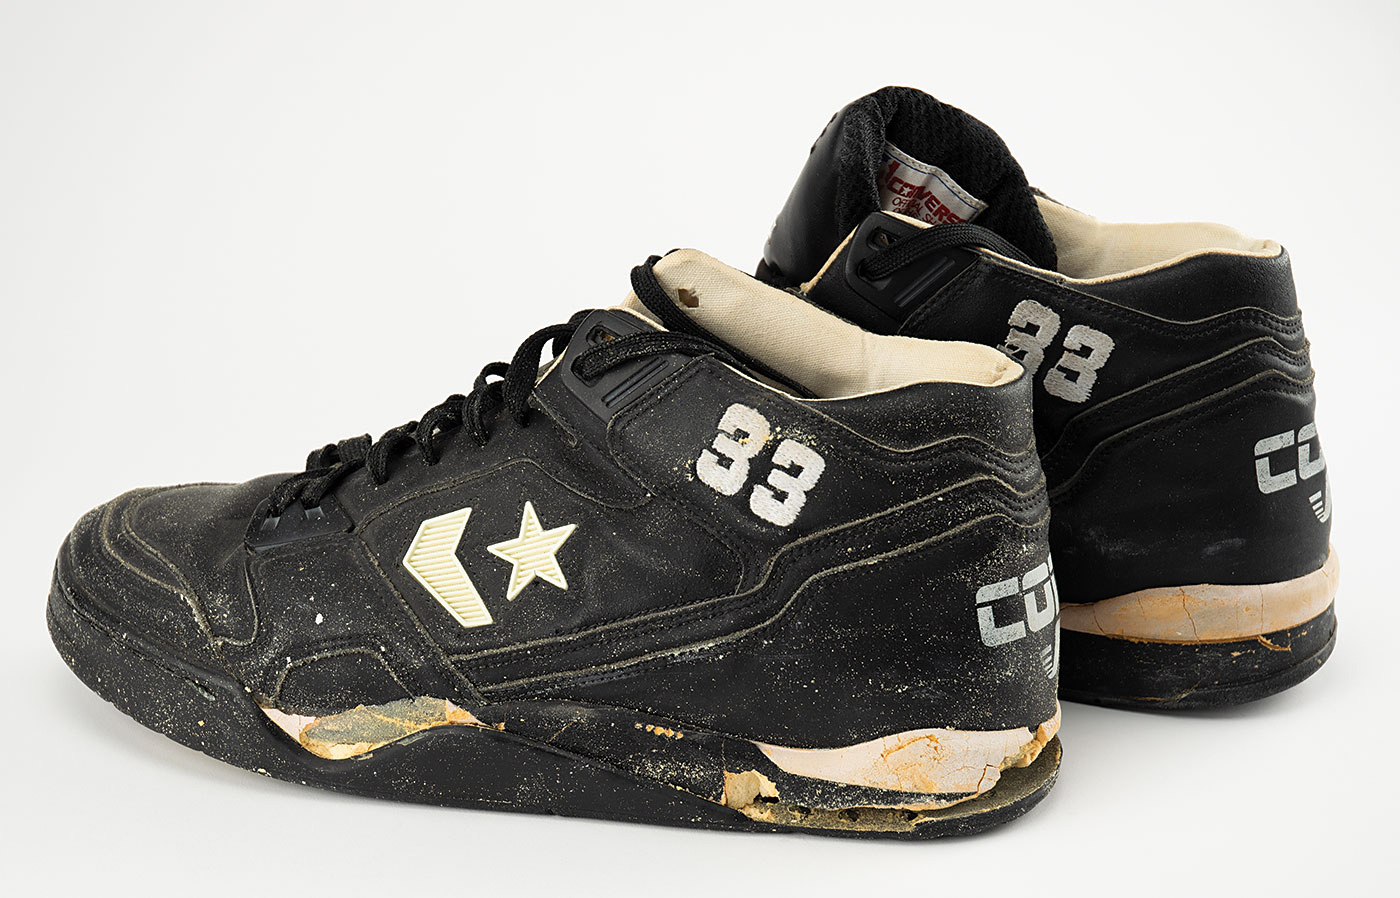 Larry Bird played ball in these 